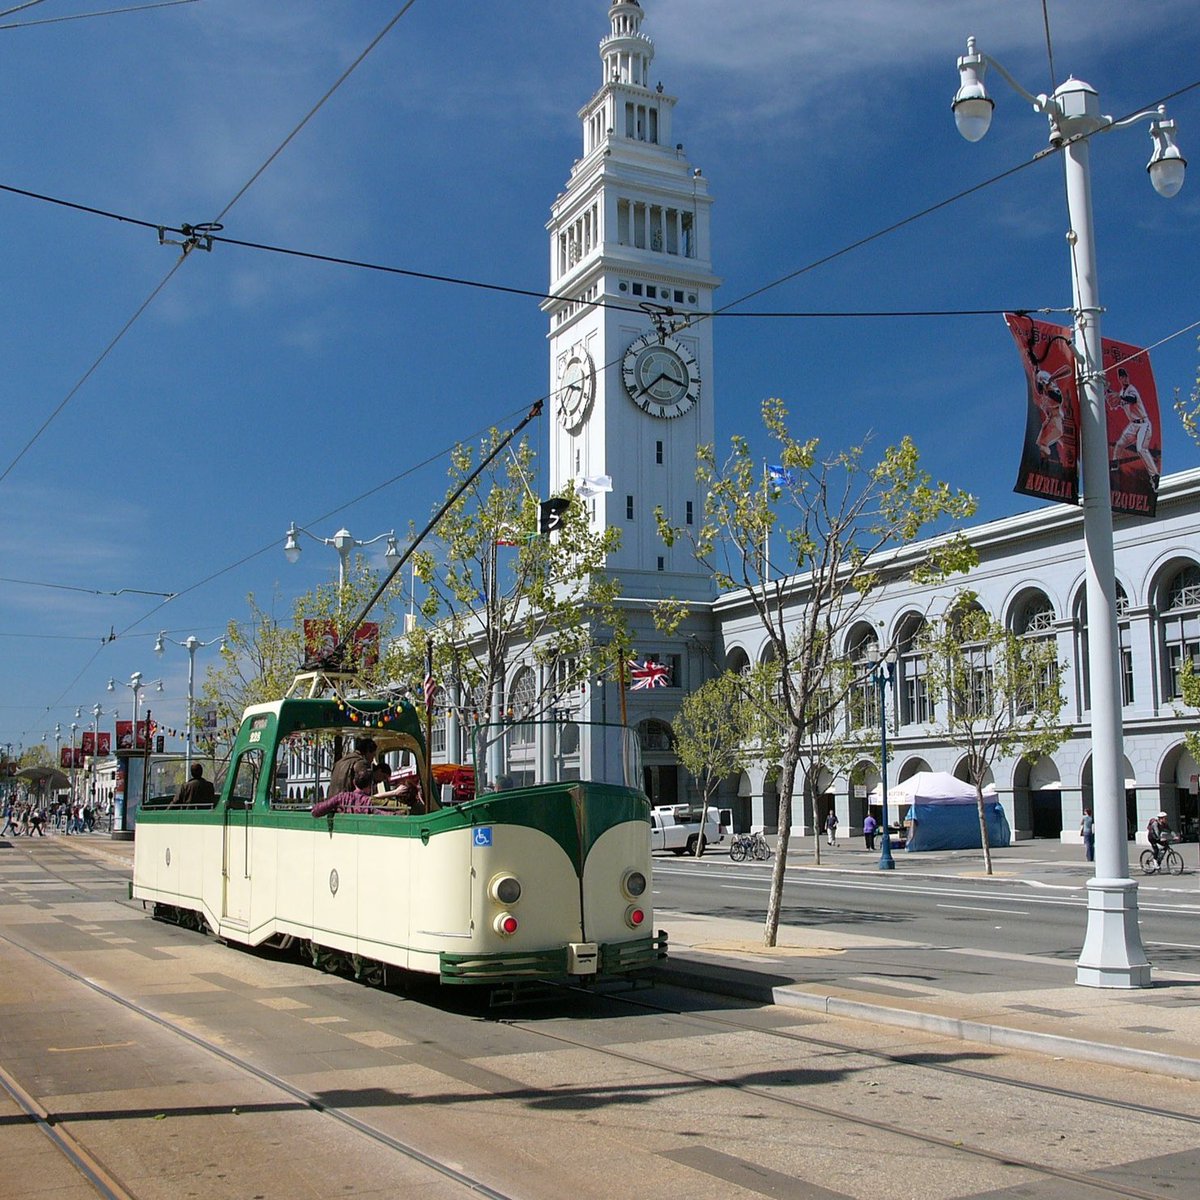 Go topless in SF! 🚃 Ever caught sight of the iconic Boat Tram riding around SF? While the Boat Tram isn't an everyday sight, Muni's got you covered for all your city travels! Find out why SF is one of the most walkable cities in the US: bit.ly/3UdV5wA